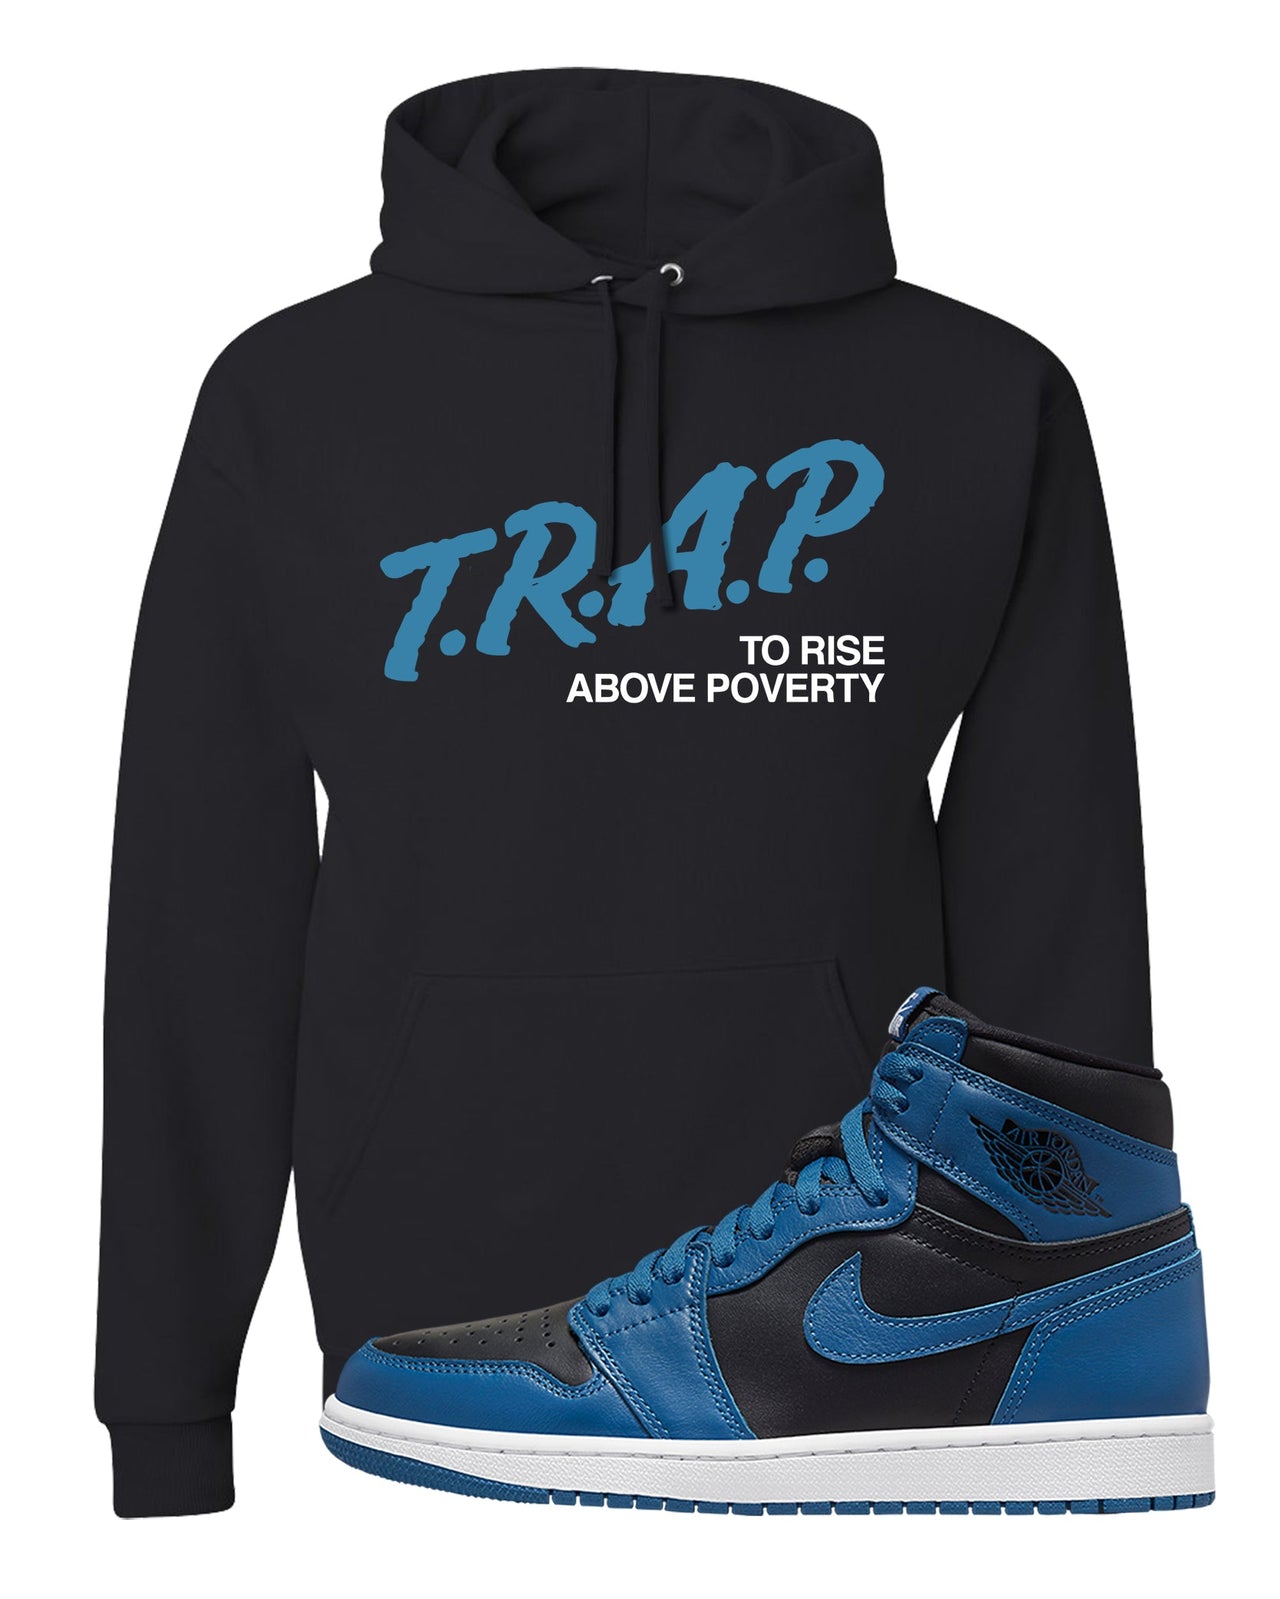 Dark Marina Blue 1s Hoodie | Trap To Rise Above Poverty, Black